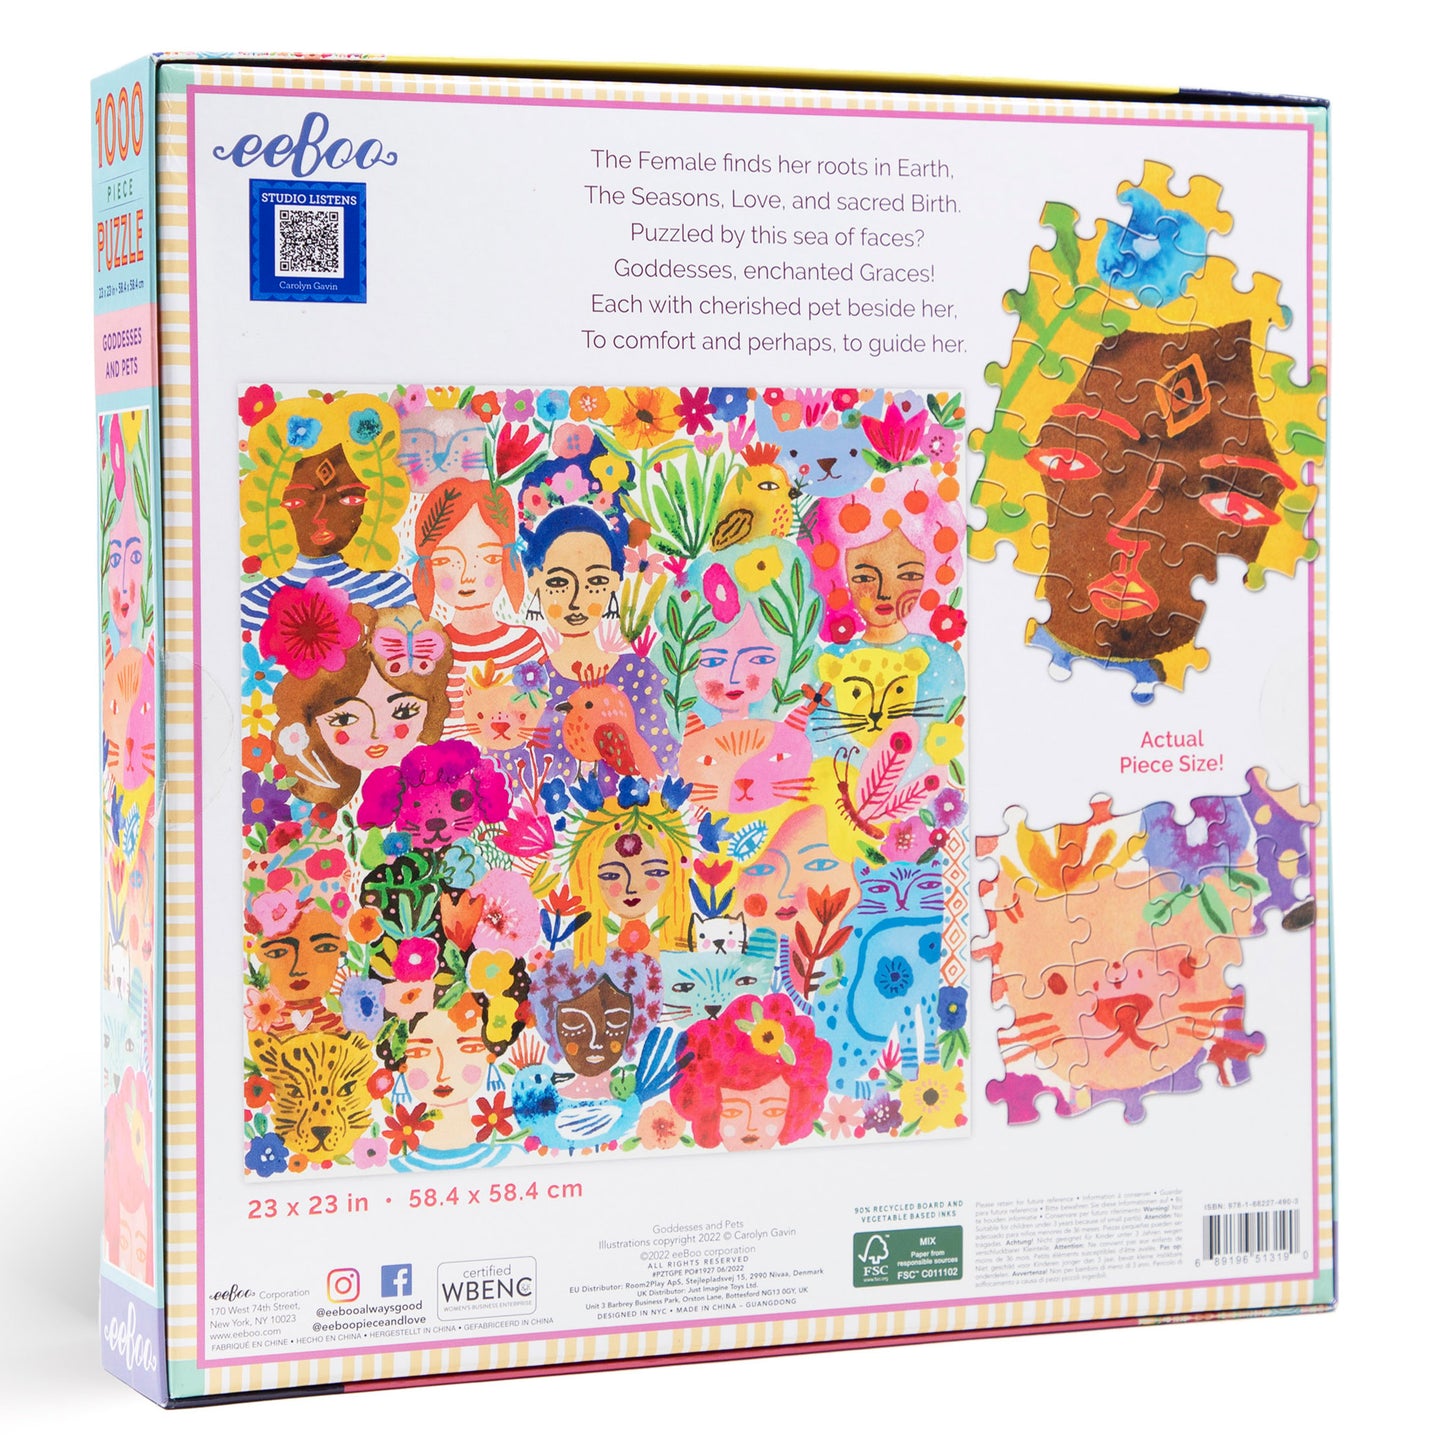 Goddesses and Pets 1000 Piece Square Jigsaw Puzzle eeBoo | Gifts for Animal Lovers